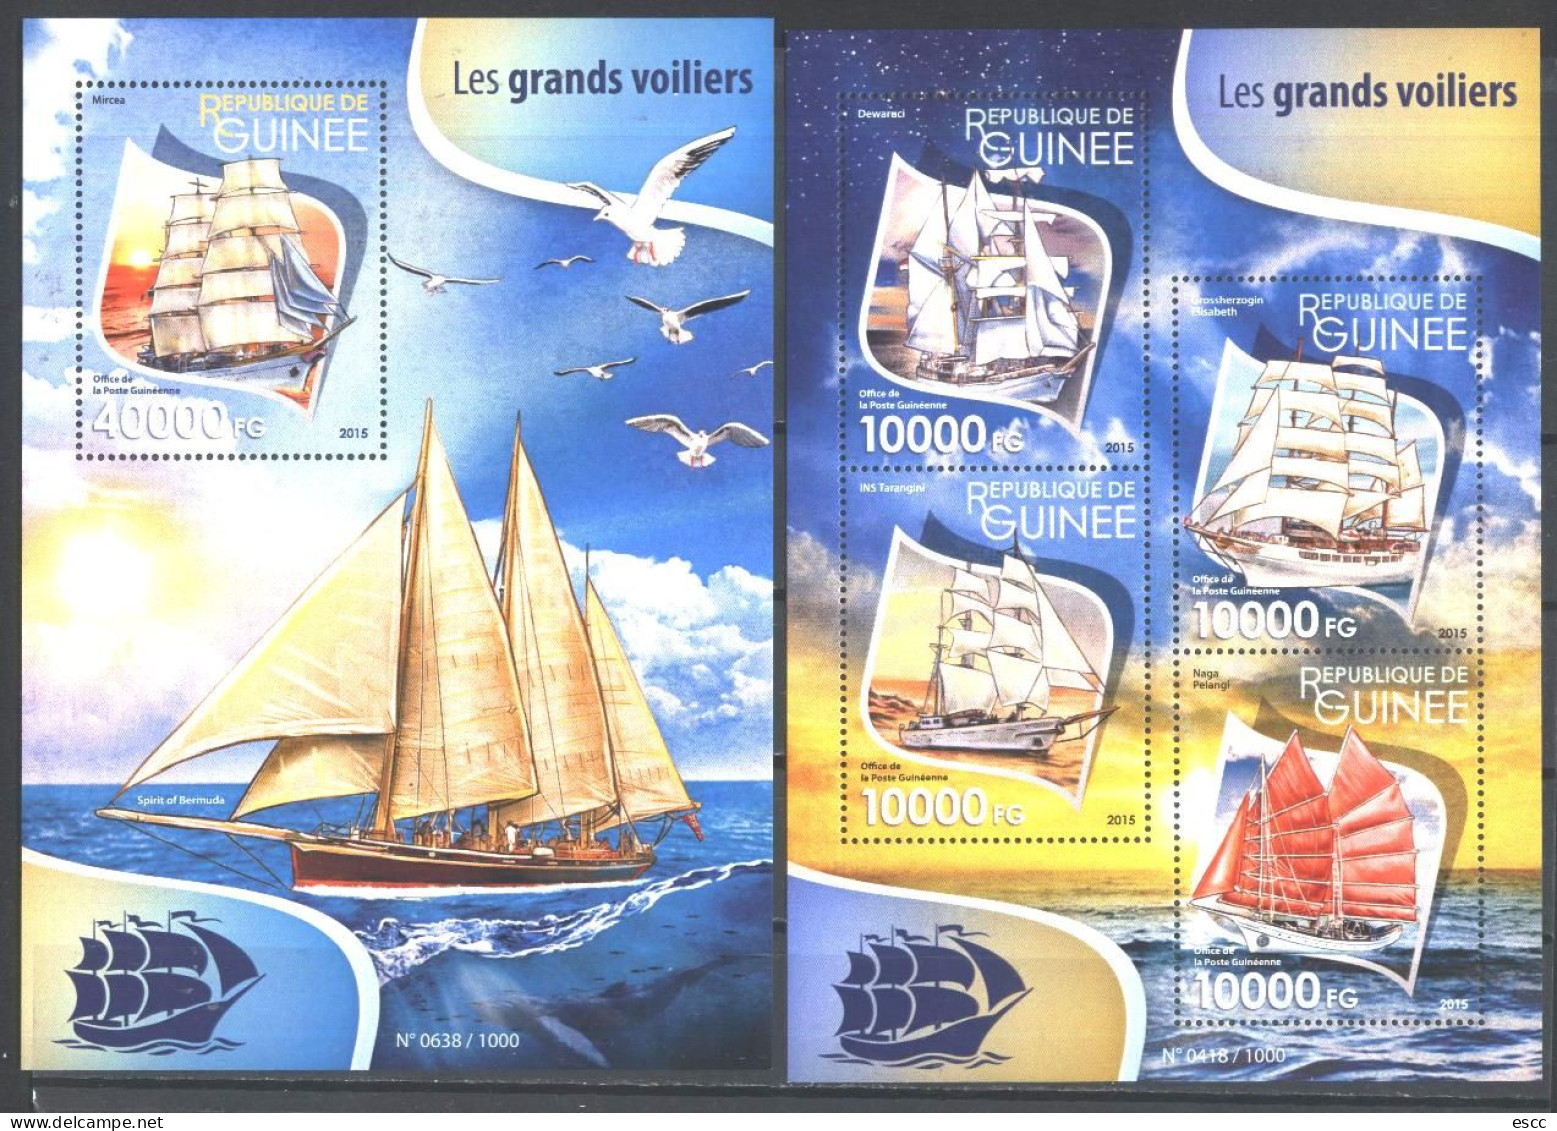 Mint Stamps In Miniature Sheet Abd S/S Ships  2015  From Guinea - Schiffe